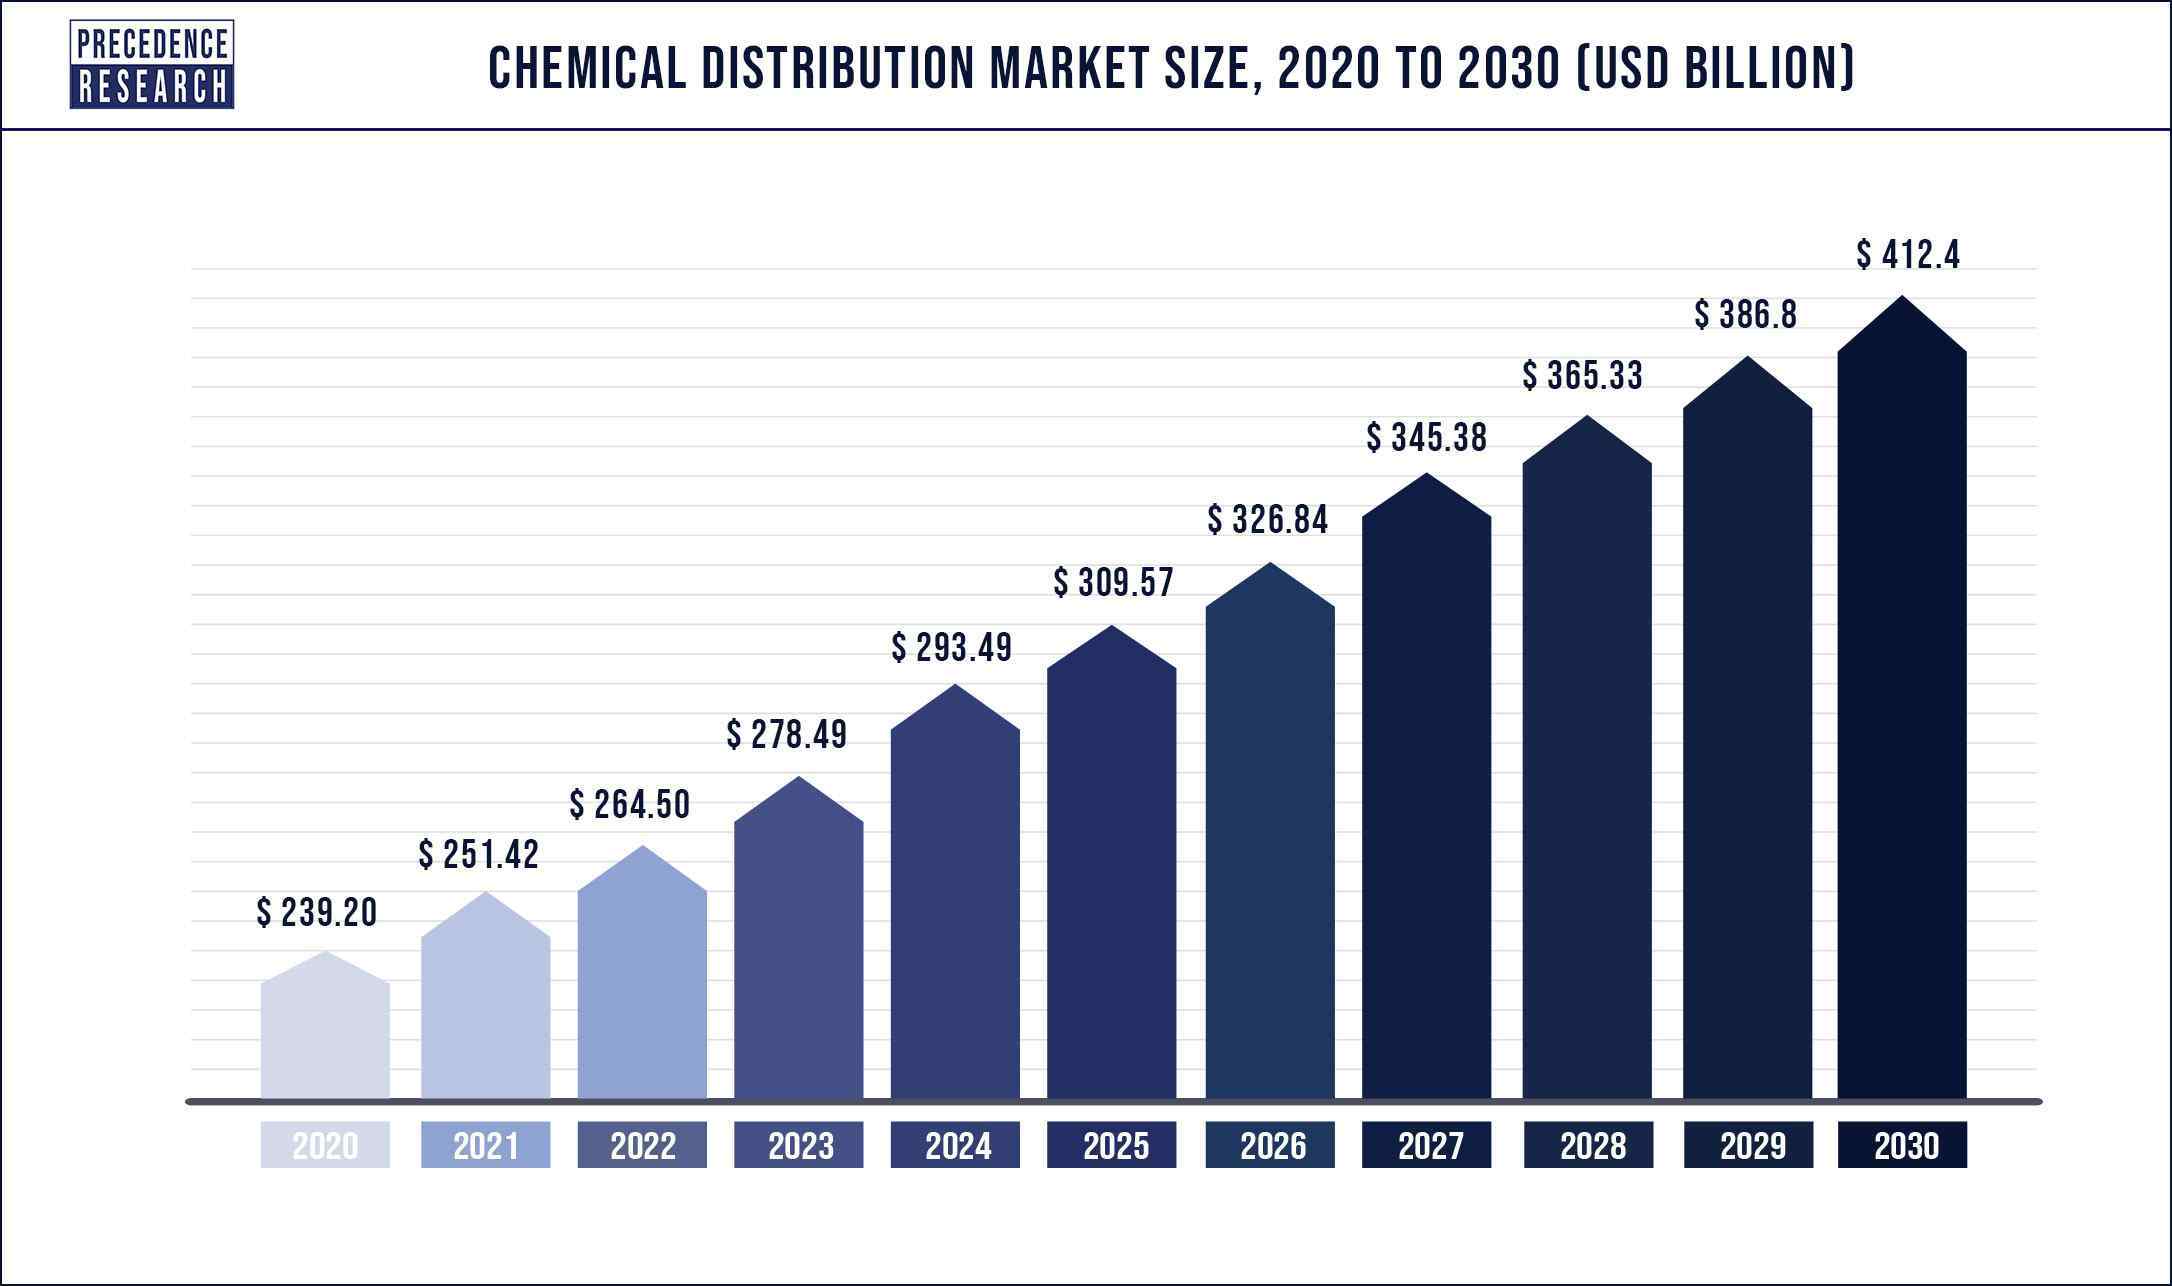 Chemical Distribution Market Size 2020 to 2030